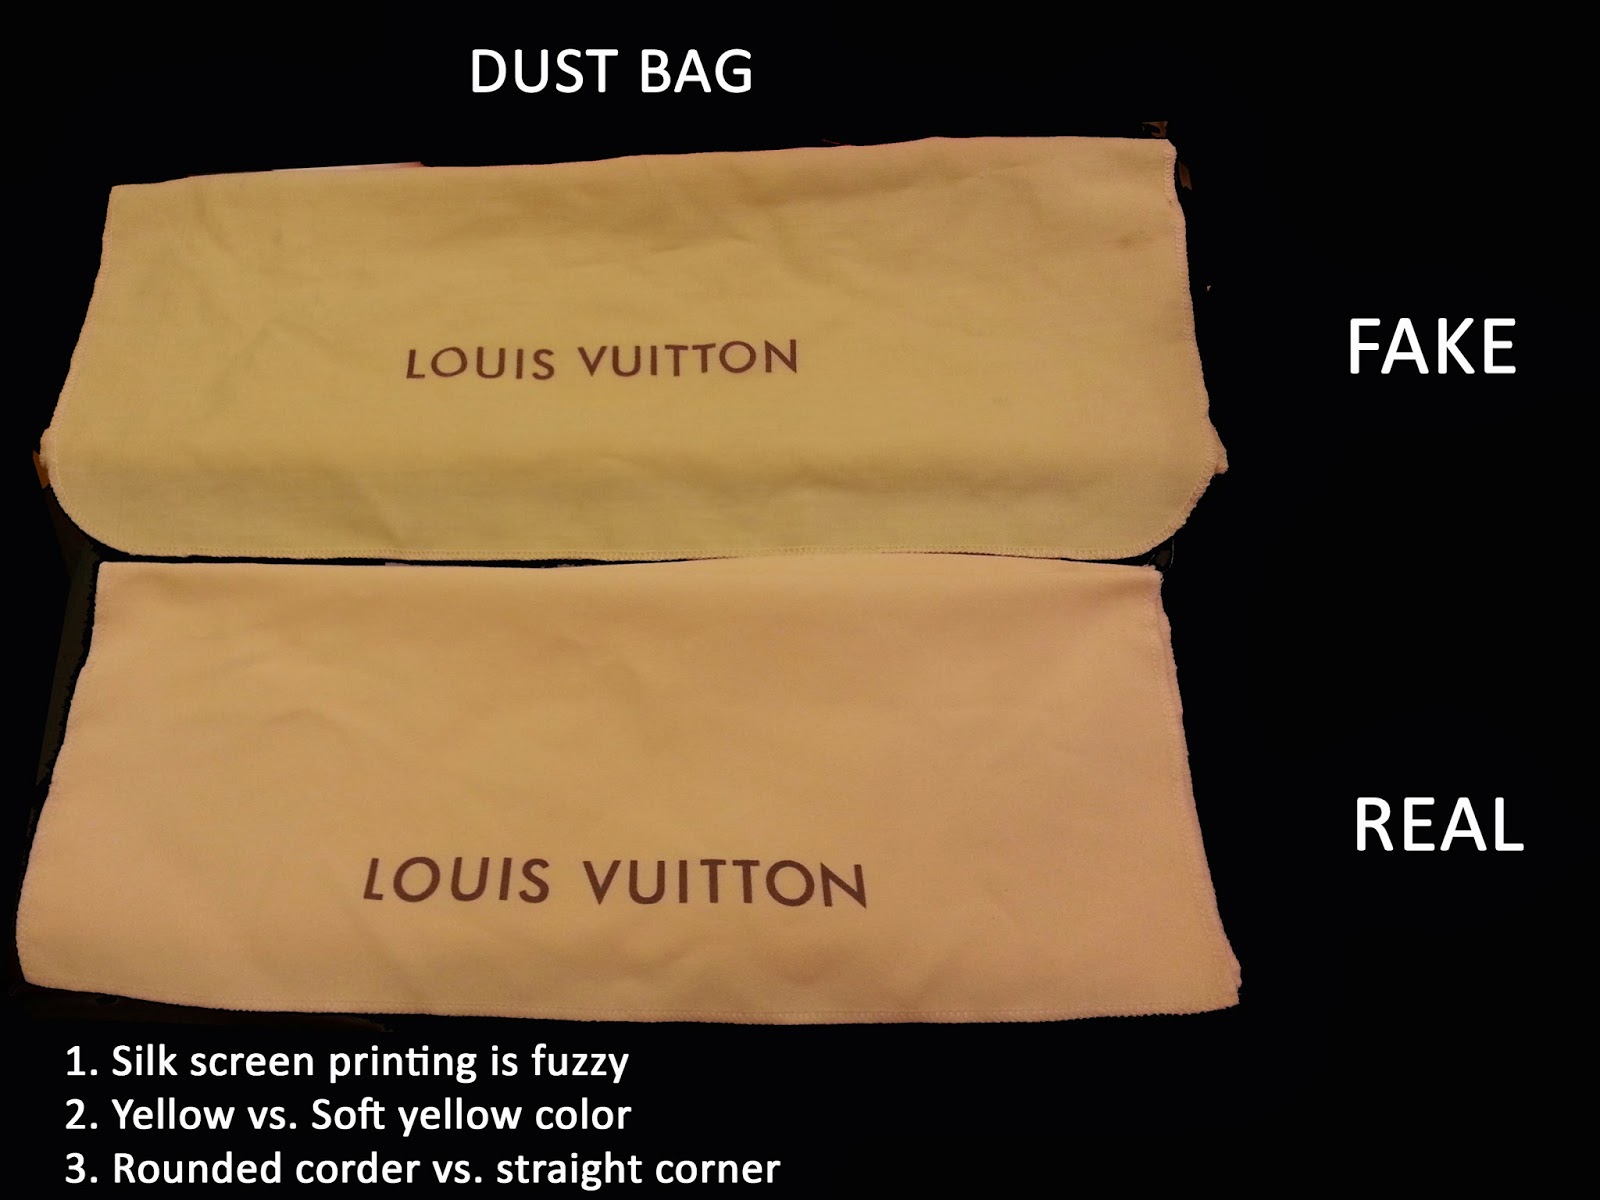 How to Determine a Real Louis Vuitton Bag